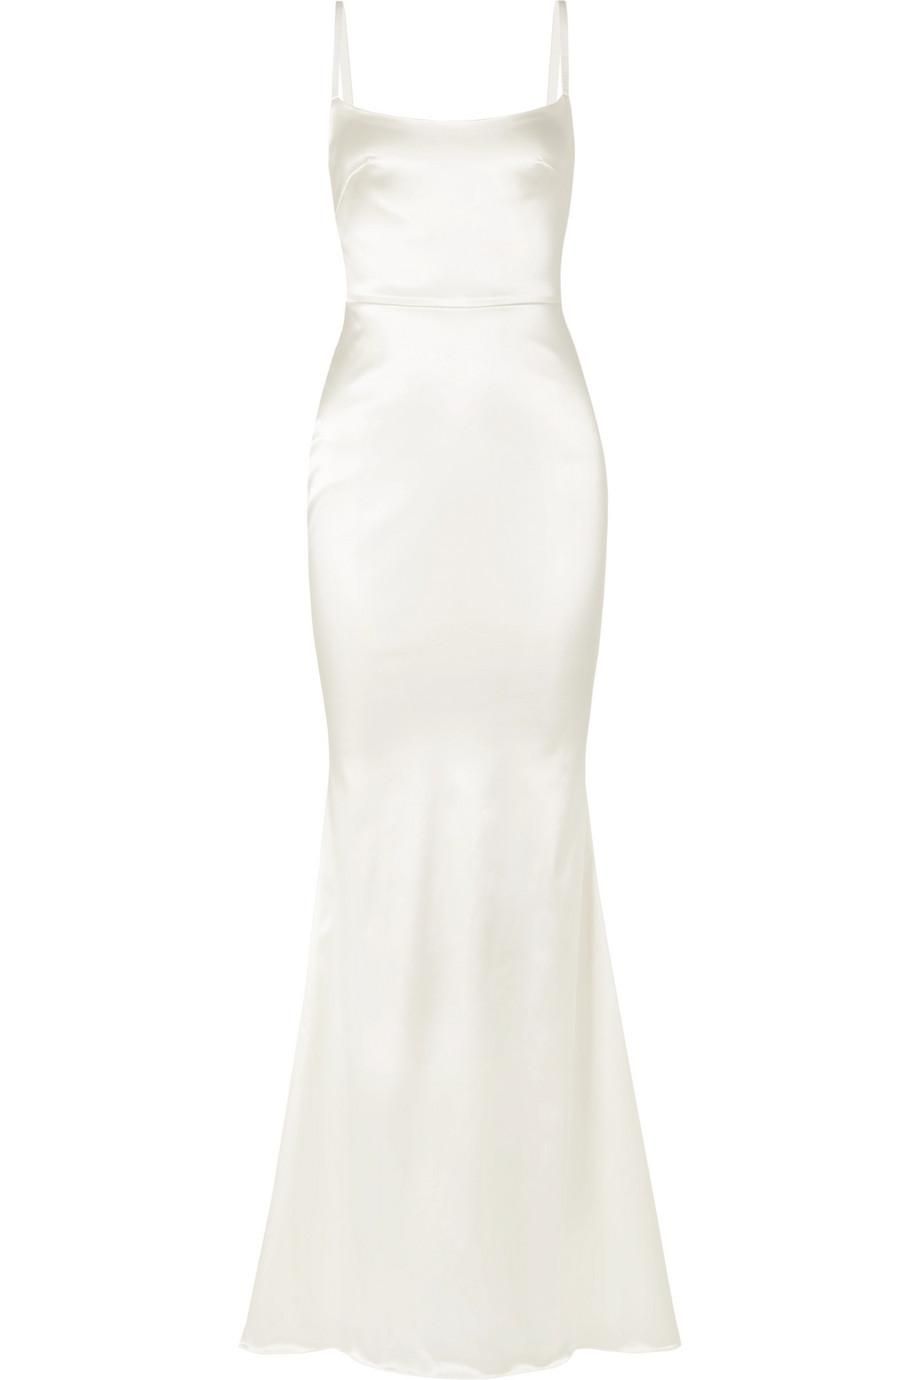 19 Minimalist Wedding Dresses for the Unfussy Bride | Who What Wear